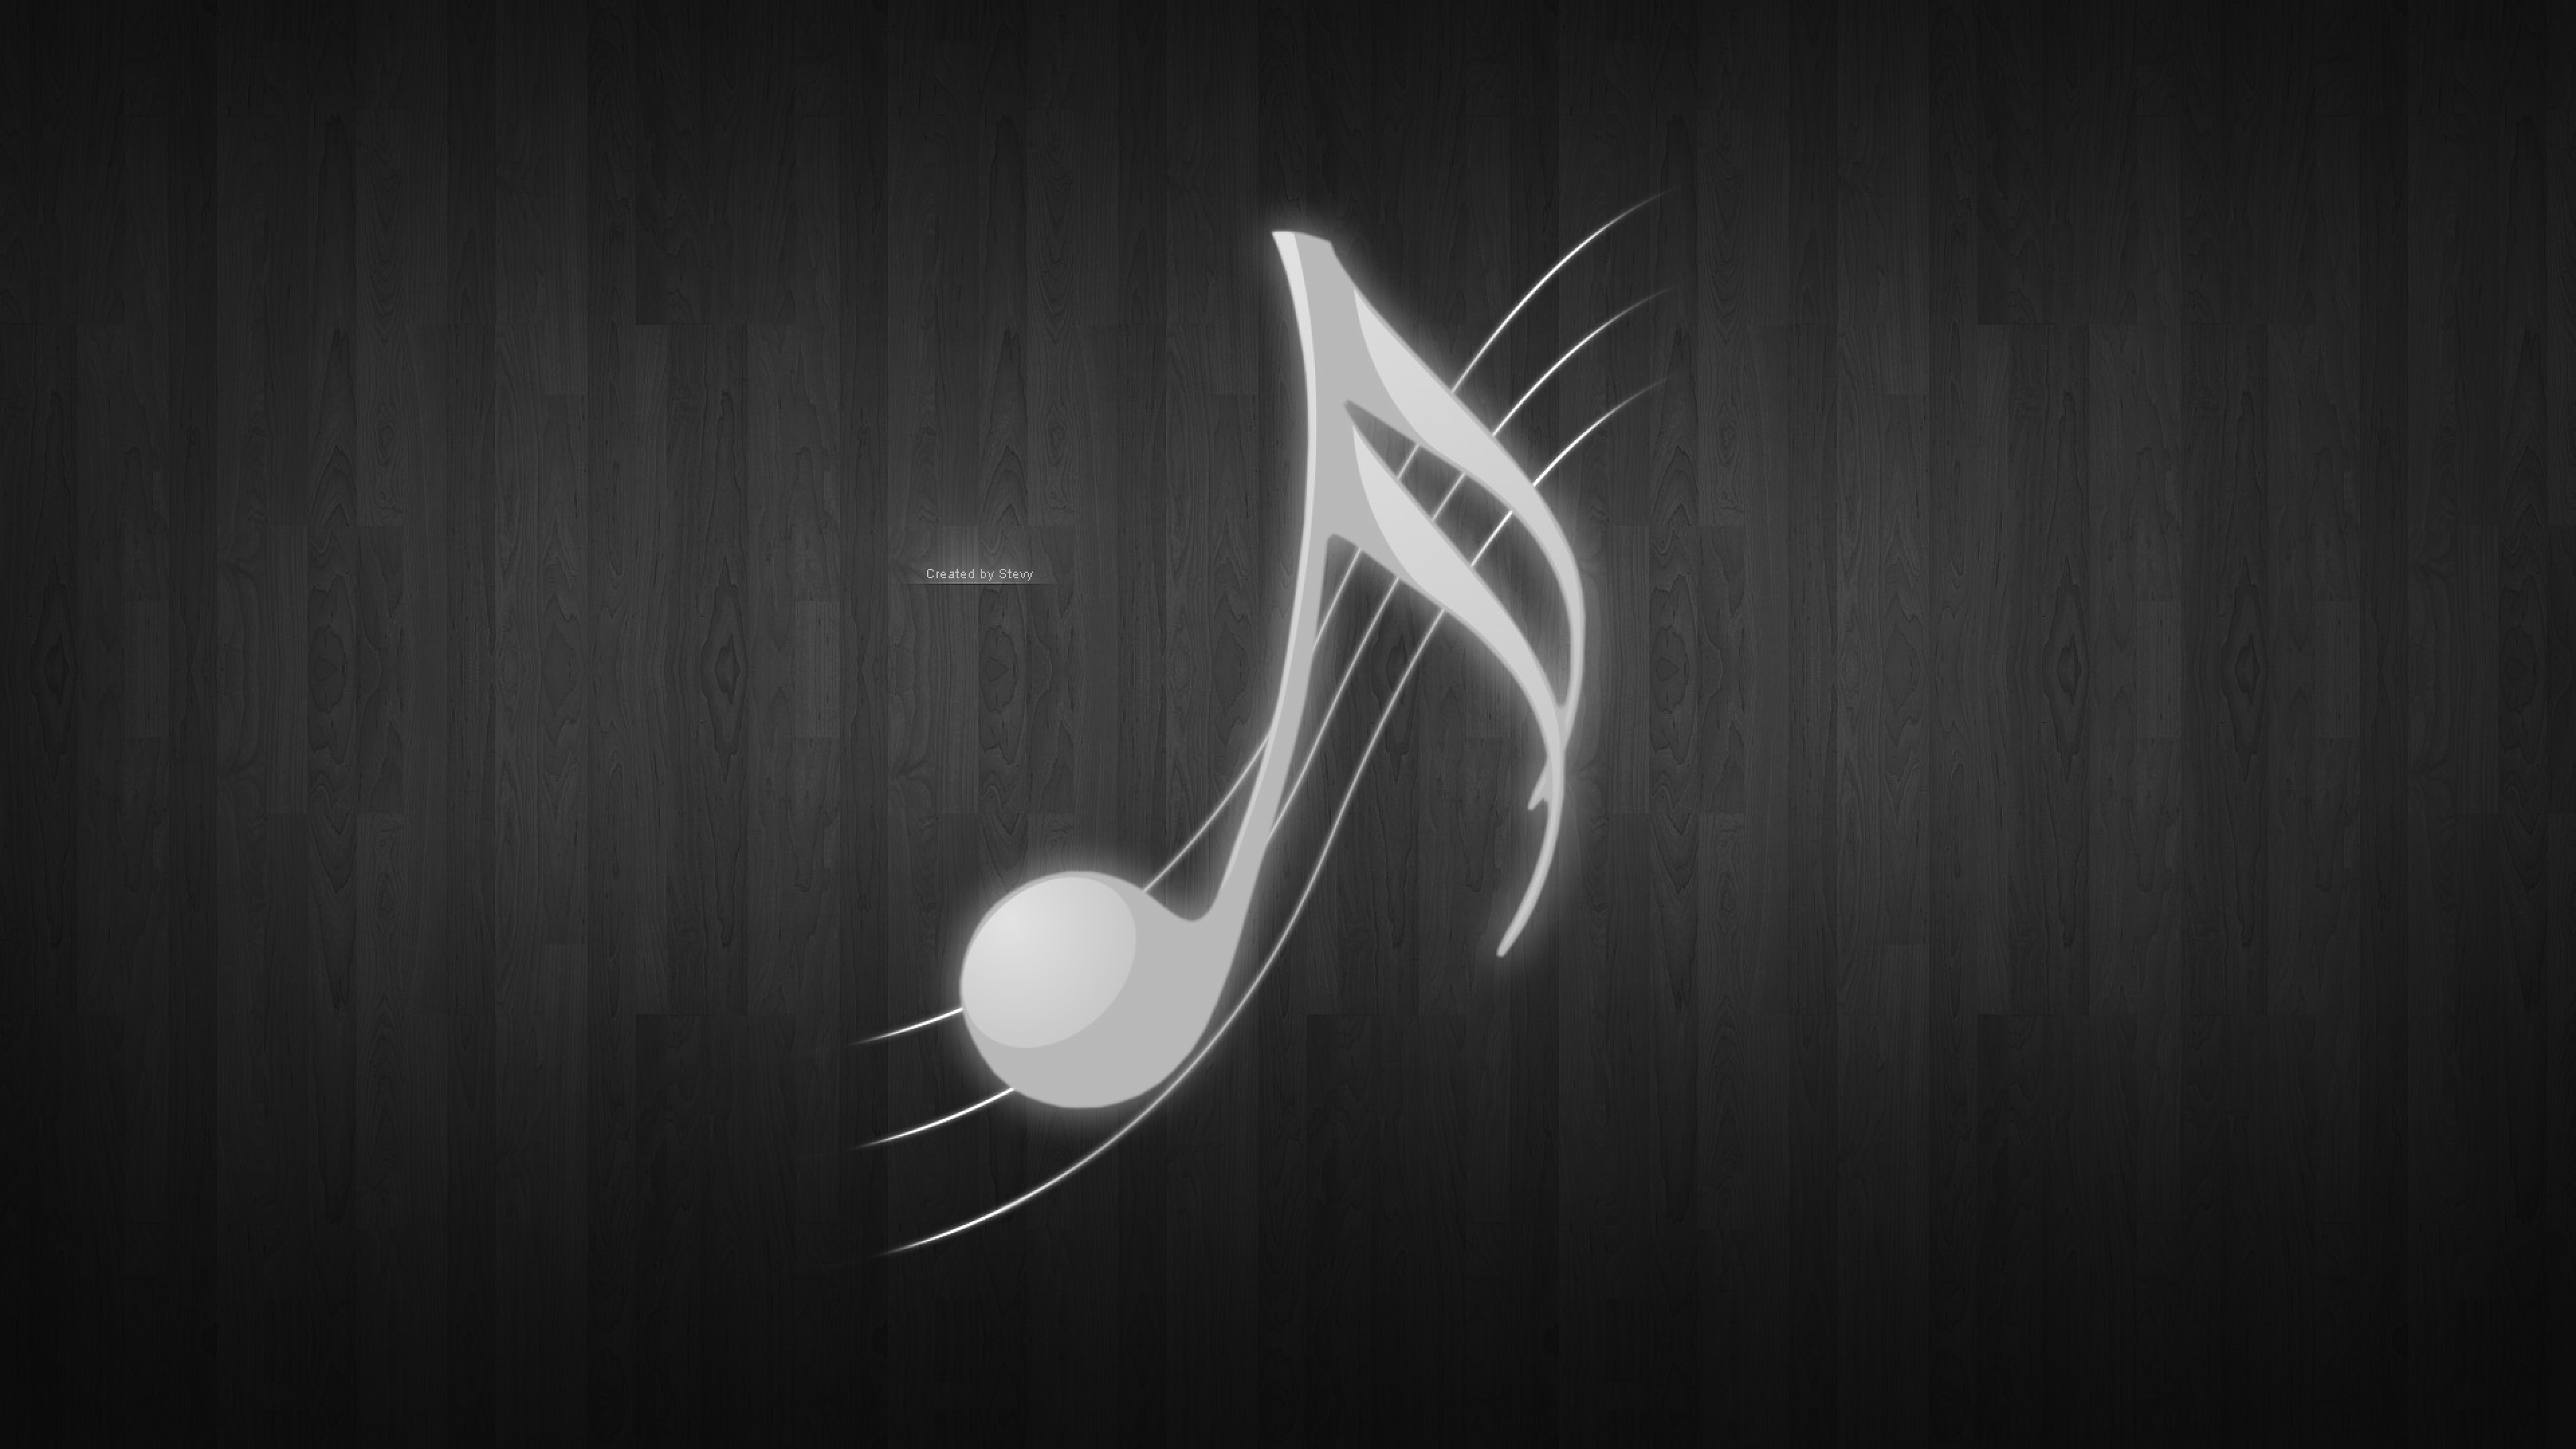 Music Notes HD Wallpaper for Desktop and Mobiles 4K Ultra HD